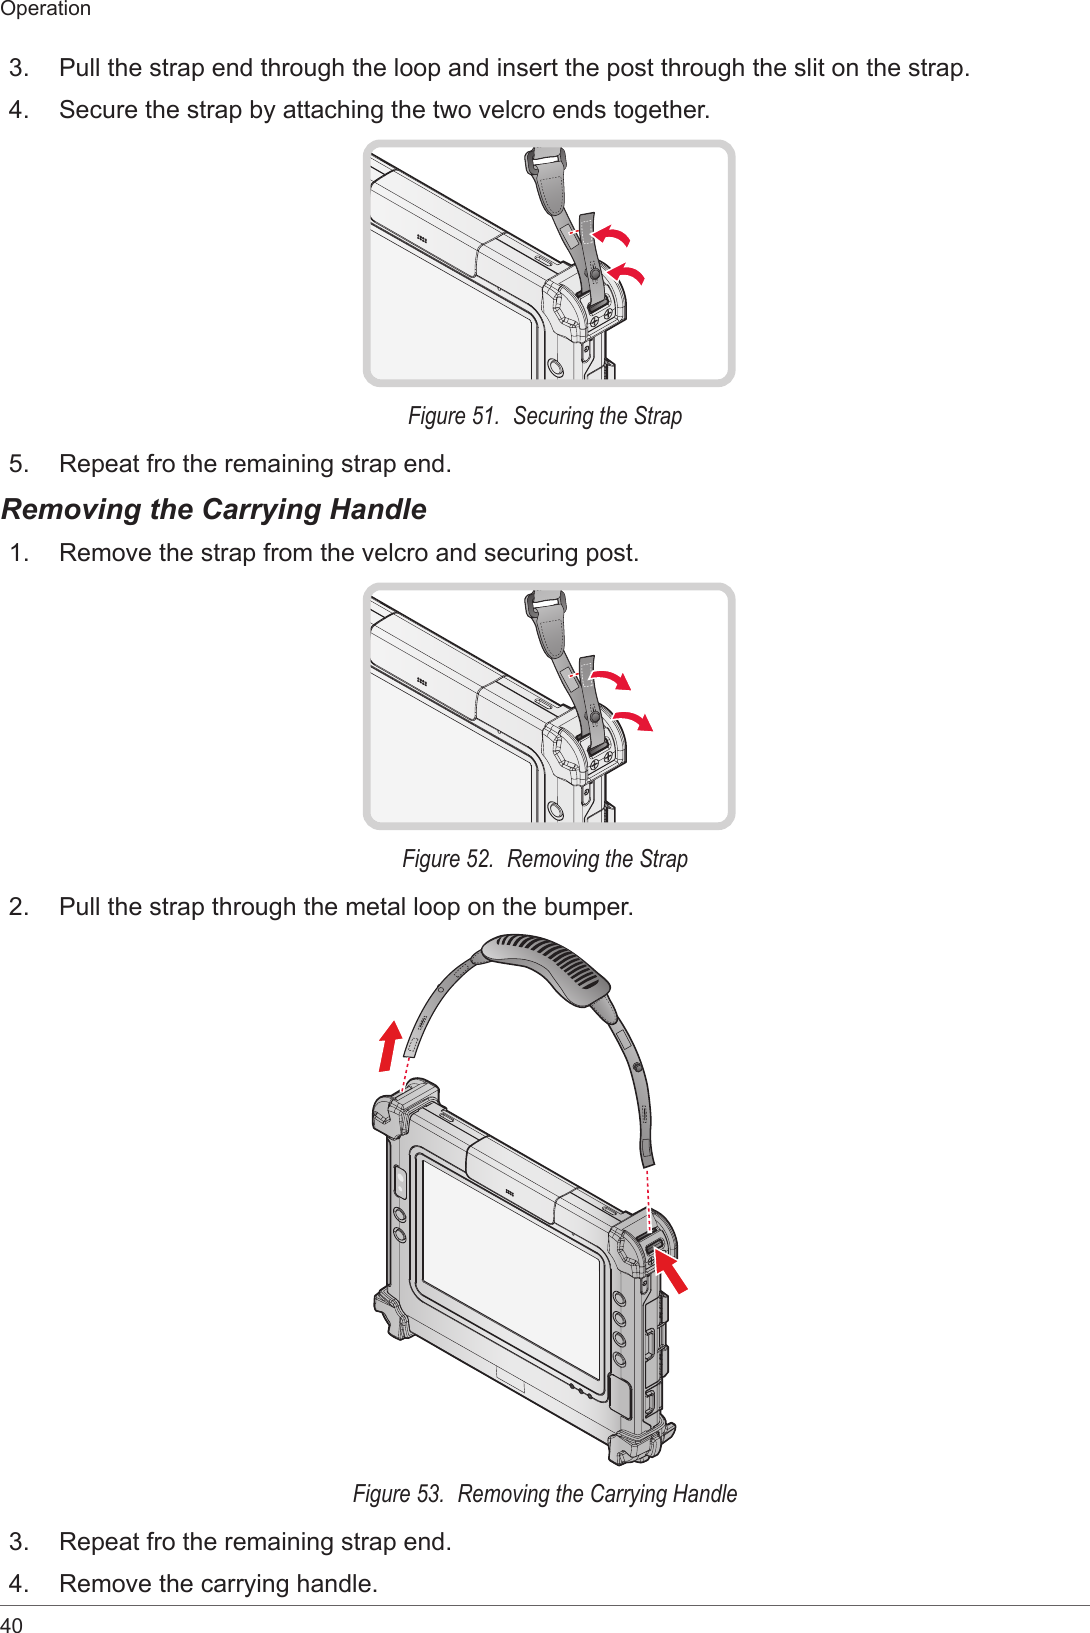 40Operation3.  Pull the strap end through the loop and insert the post through the slit on the strap.4.  Secure the strap by attaching the two velcro ends together.Figure 51.  Securing the Strap5.  Repeat fro the remaining strap end.Removing the Carrying Handle1.  Remove the strap from the velcro and securing post.Figure 52.  Removing the Strap2.  Pull the strap through the metal loop on the bumper.Figure 53.  Removing the Carrying Handle3.  Repeat fro the remaining strap end.4.  Remove the carrying handle.